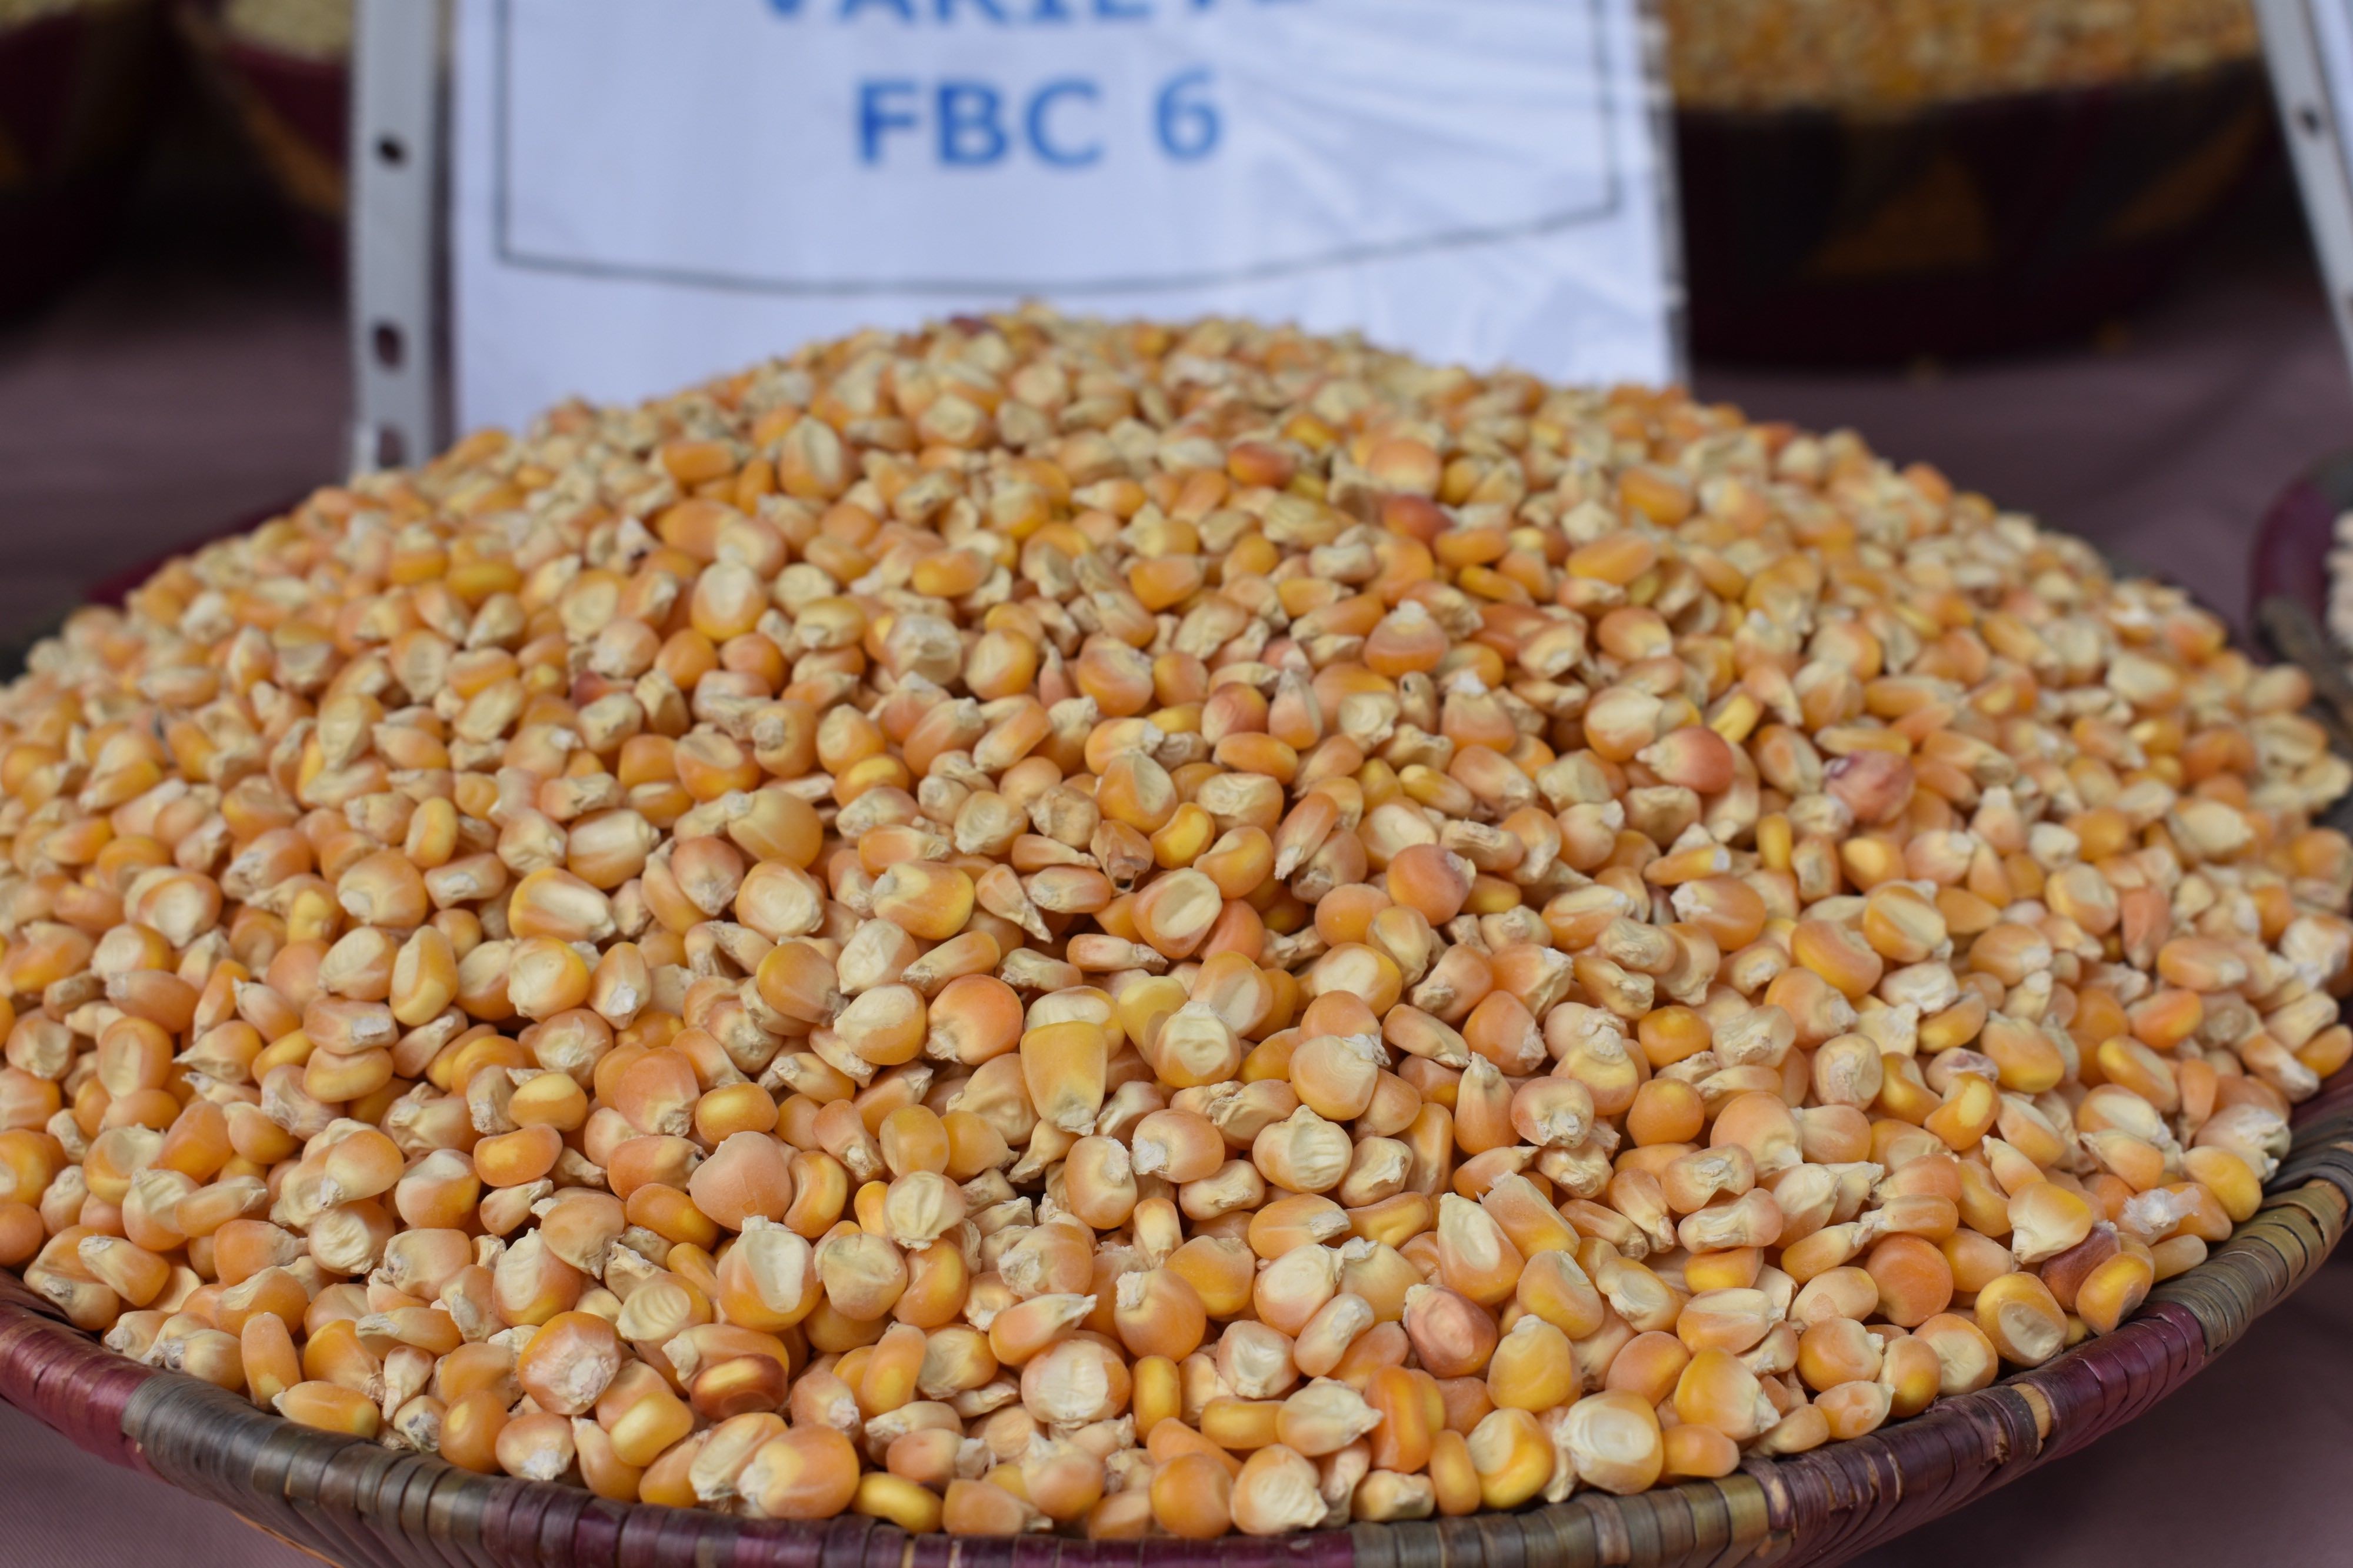 Hunger’s Vicious Cycle: Intersecting food price, security and political crises in Burkina Faso